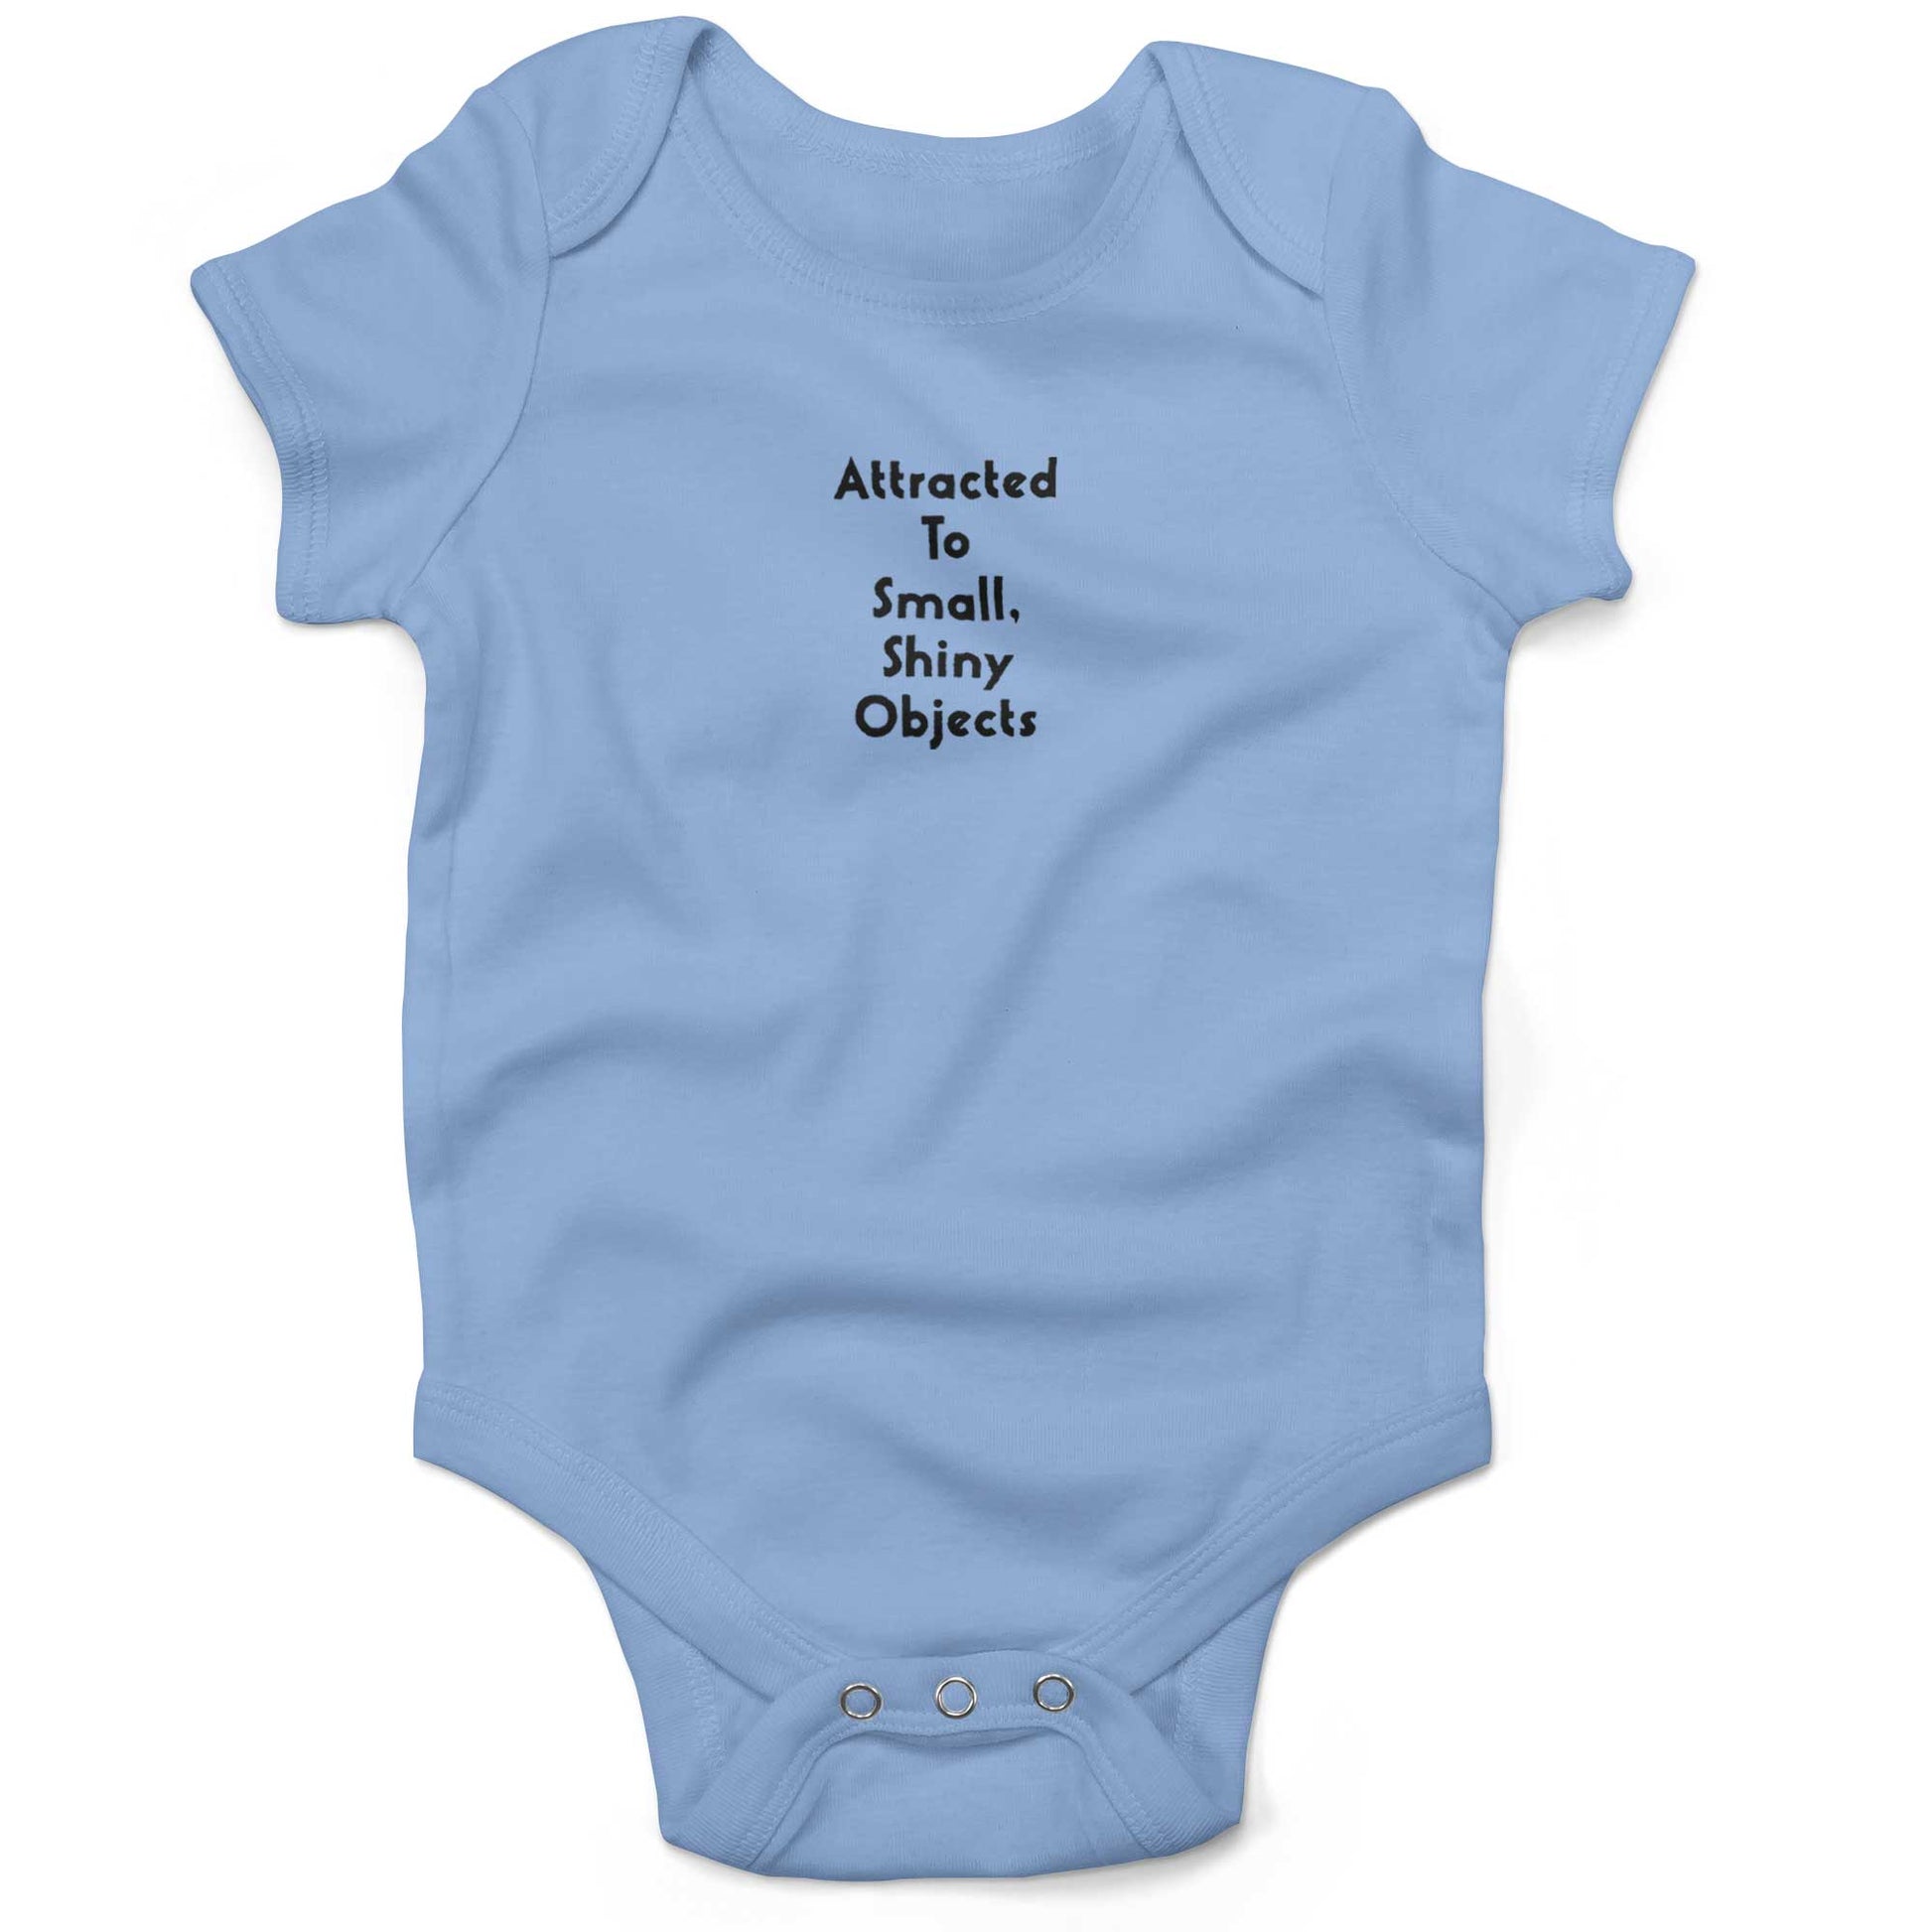 Attracted To Small, Shiny Objects Baby One Piece-Organic Baby Blue-3-6 months